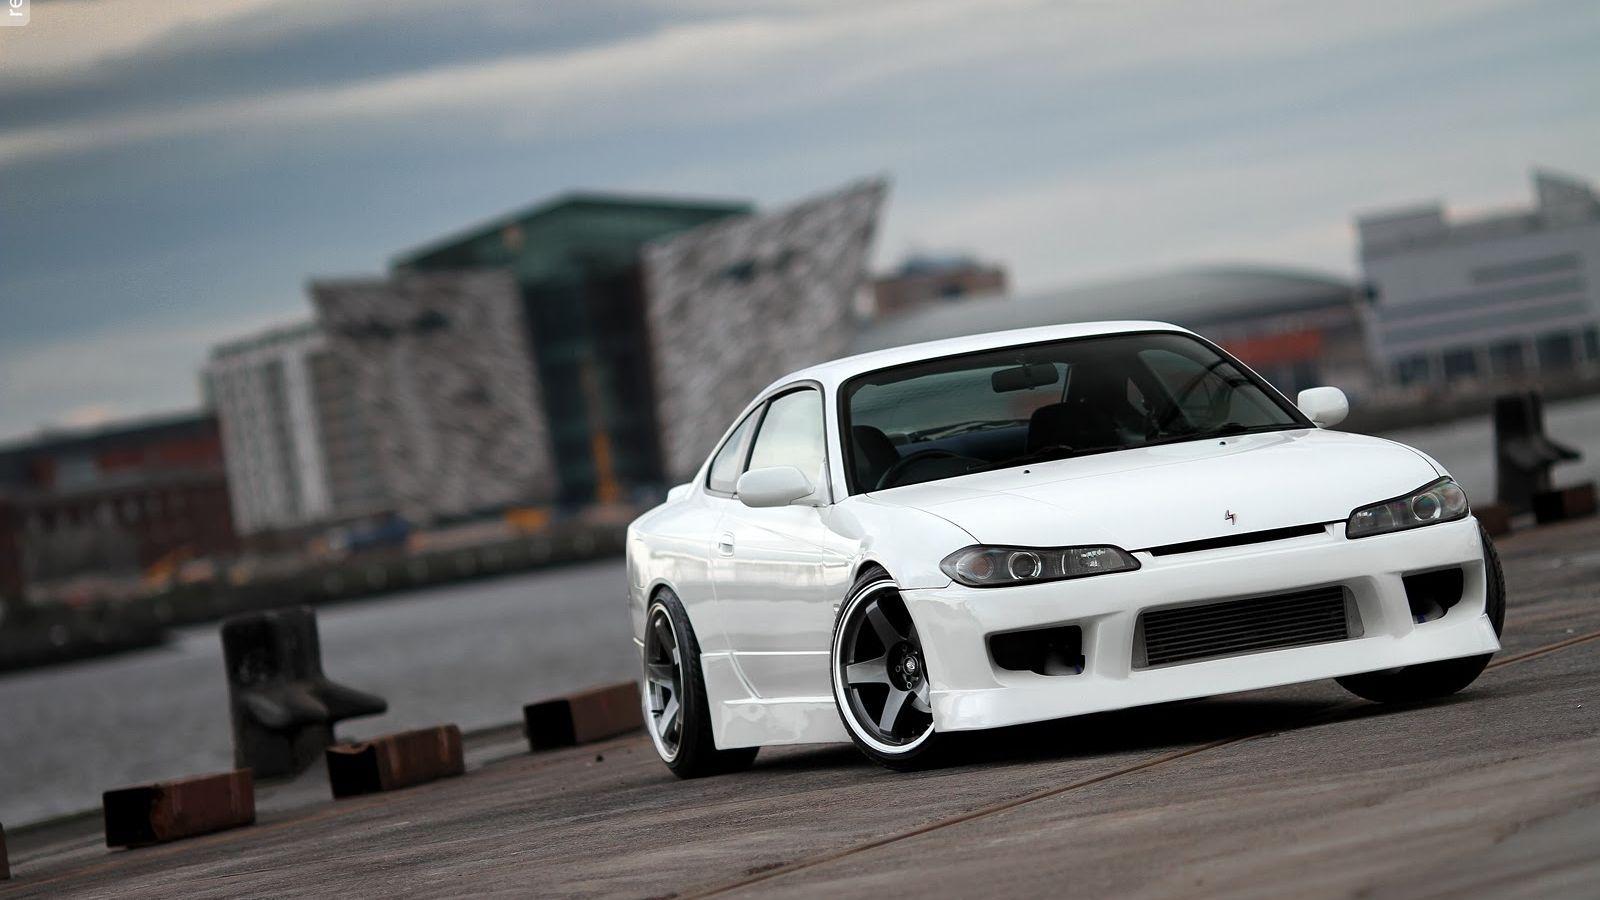 Silvia S15 Wallpapers Top Free Silvia S15 Backgrounds Wallpaperaccess